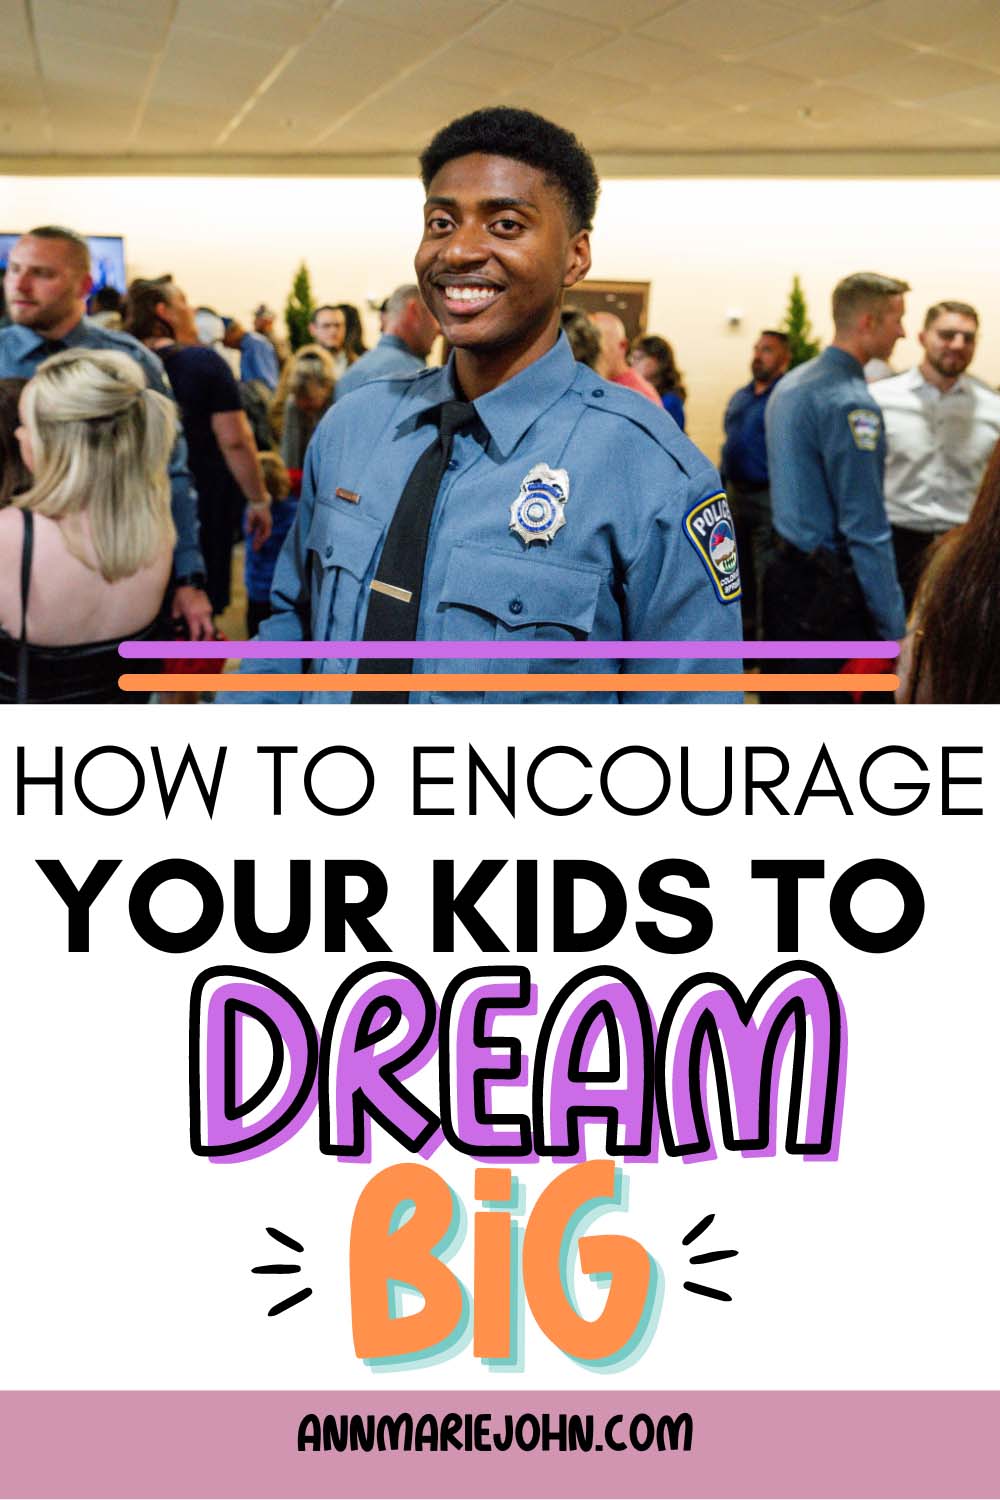 How To Encourage Your Kids To Dream Big